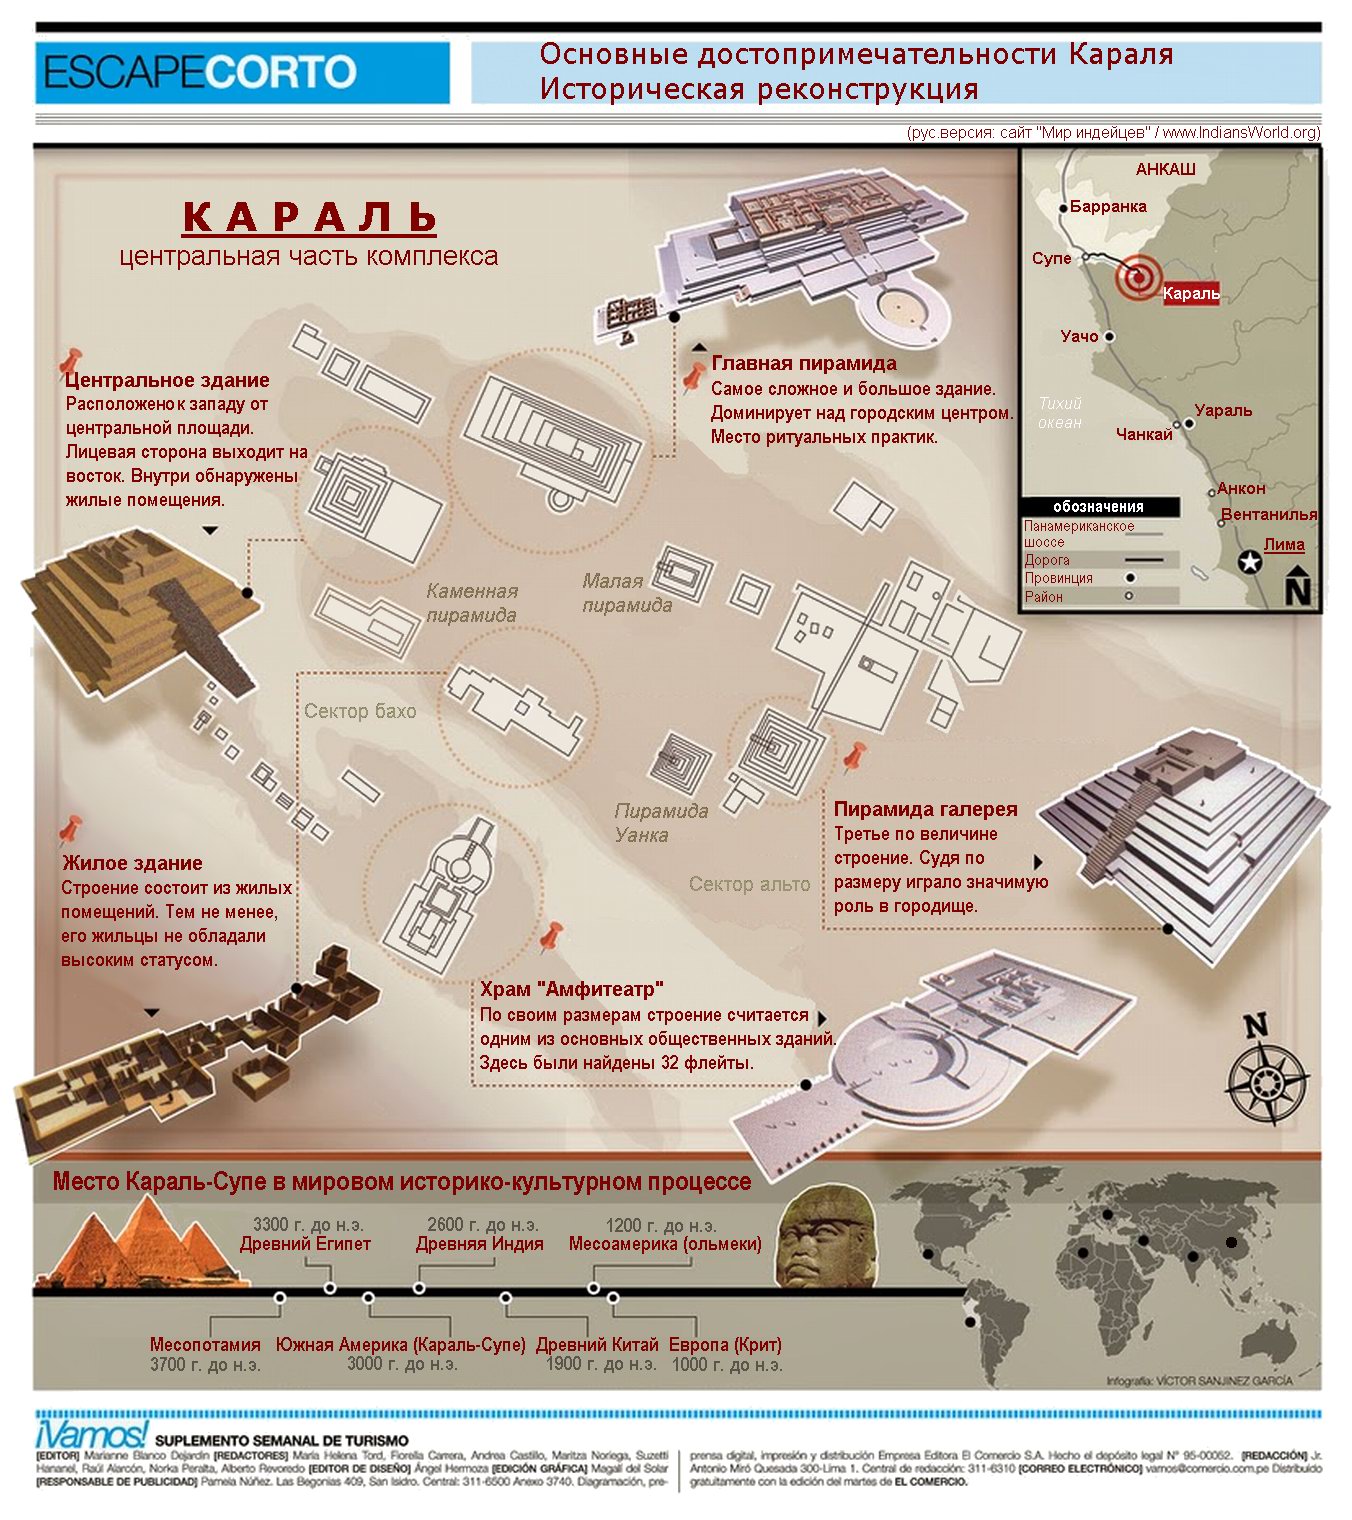 civilization_caral_supe_infographic.jpg